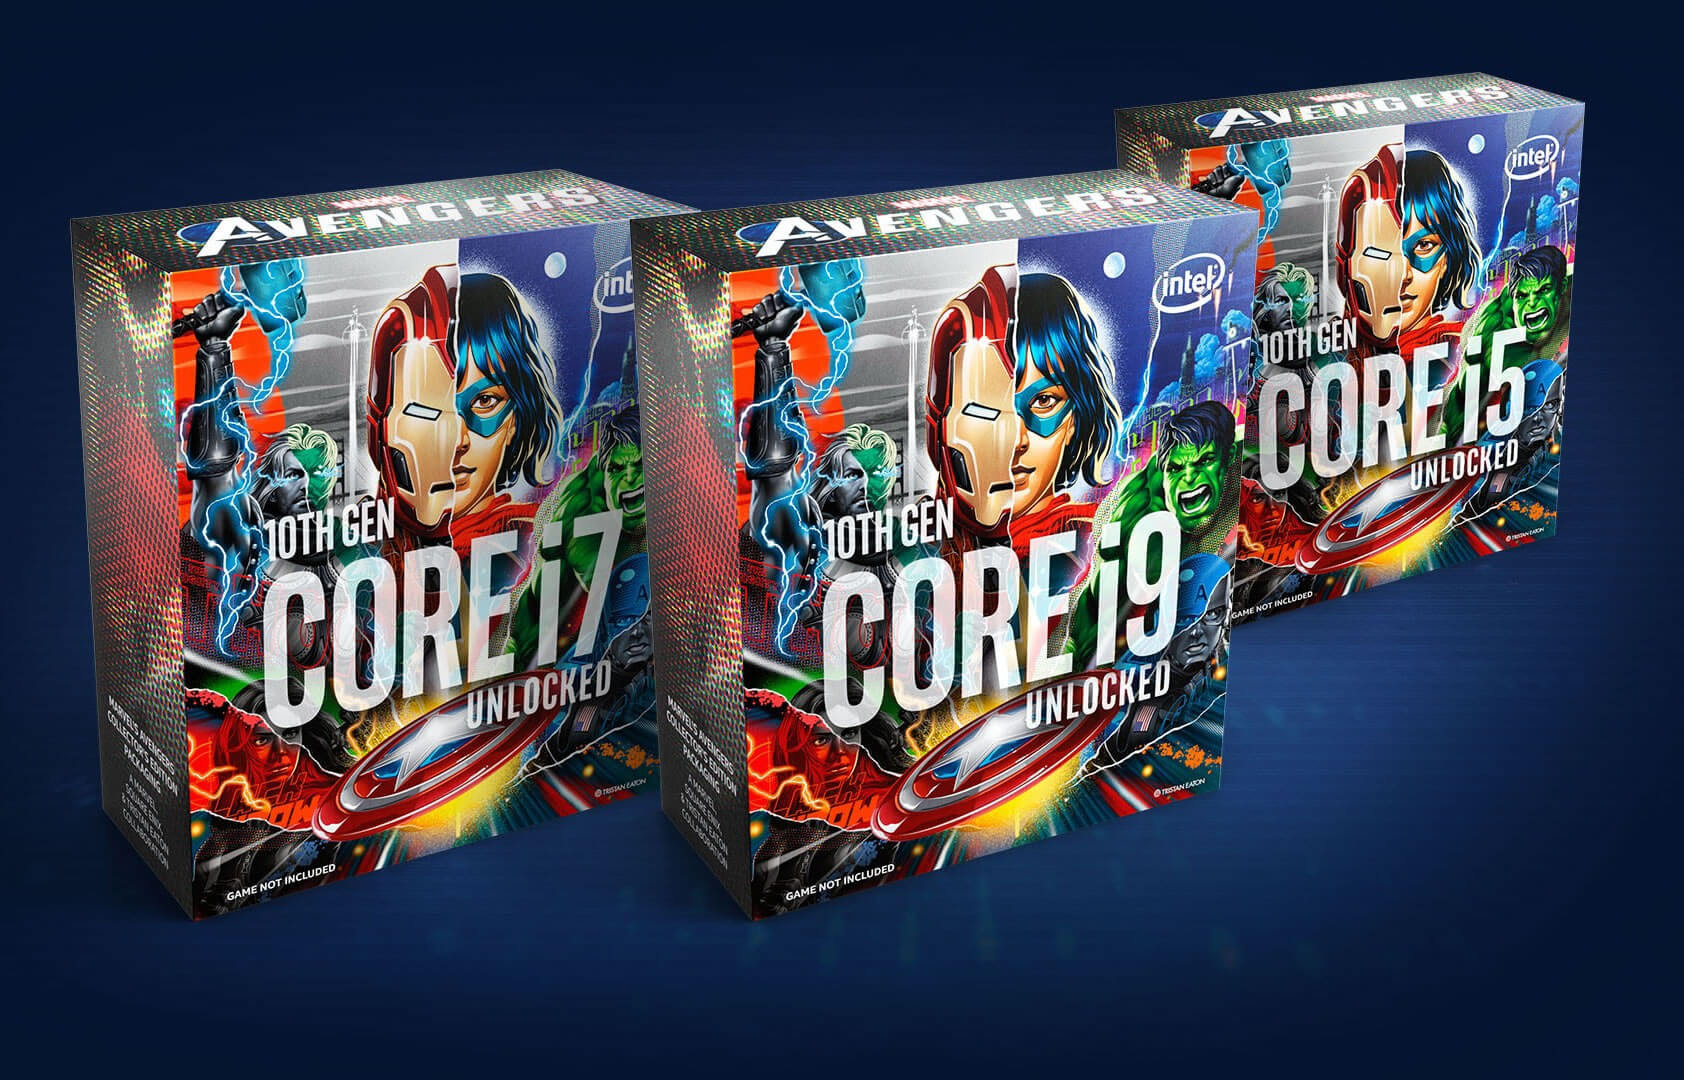 Intel confirms Marvel's Avengers Collector's Edition CPUs: cool packaging, but no game (updated)